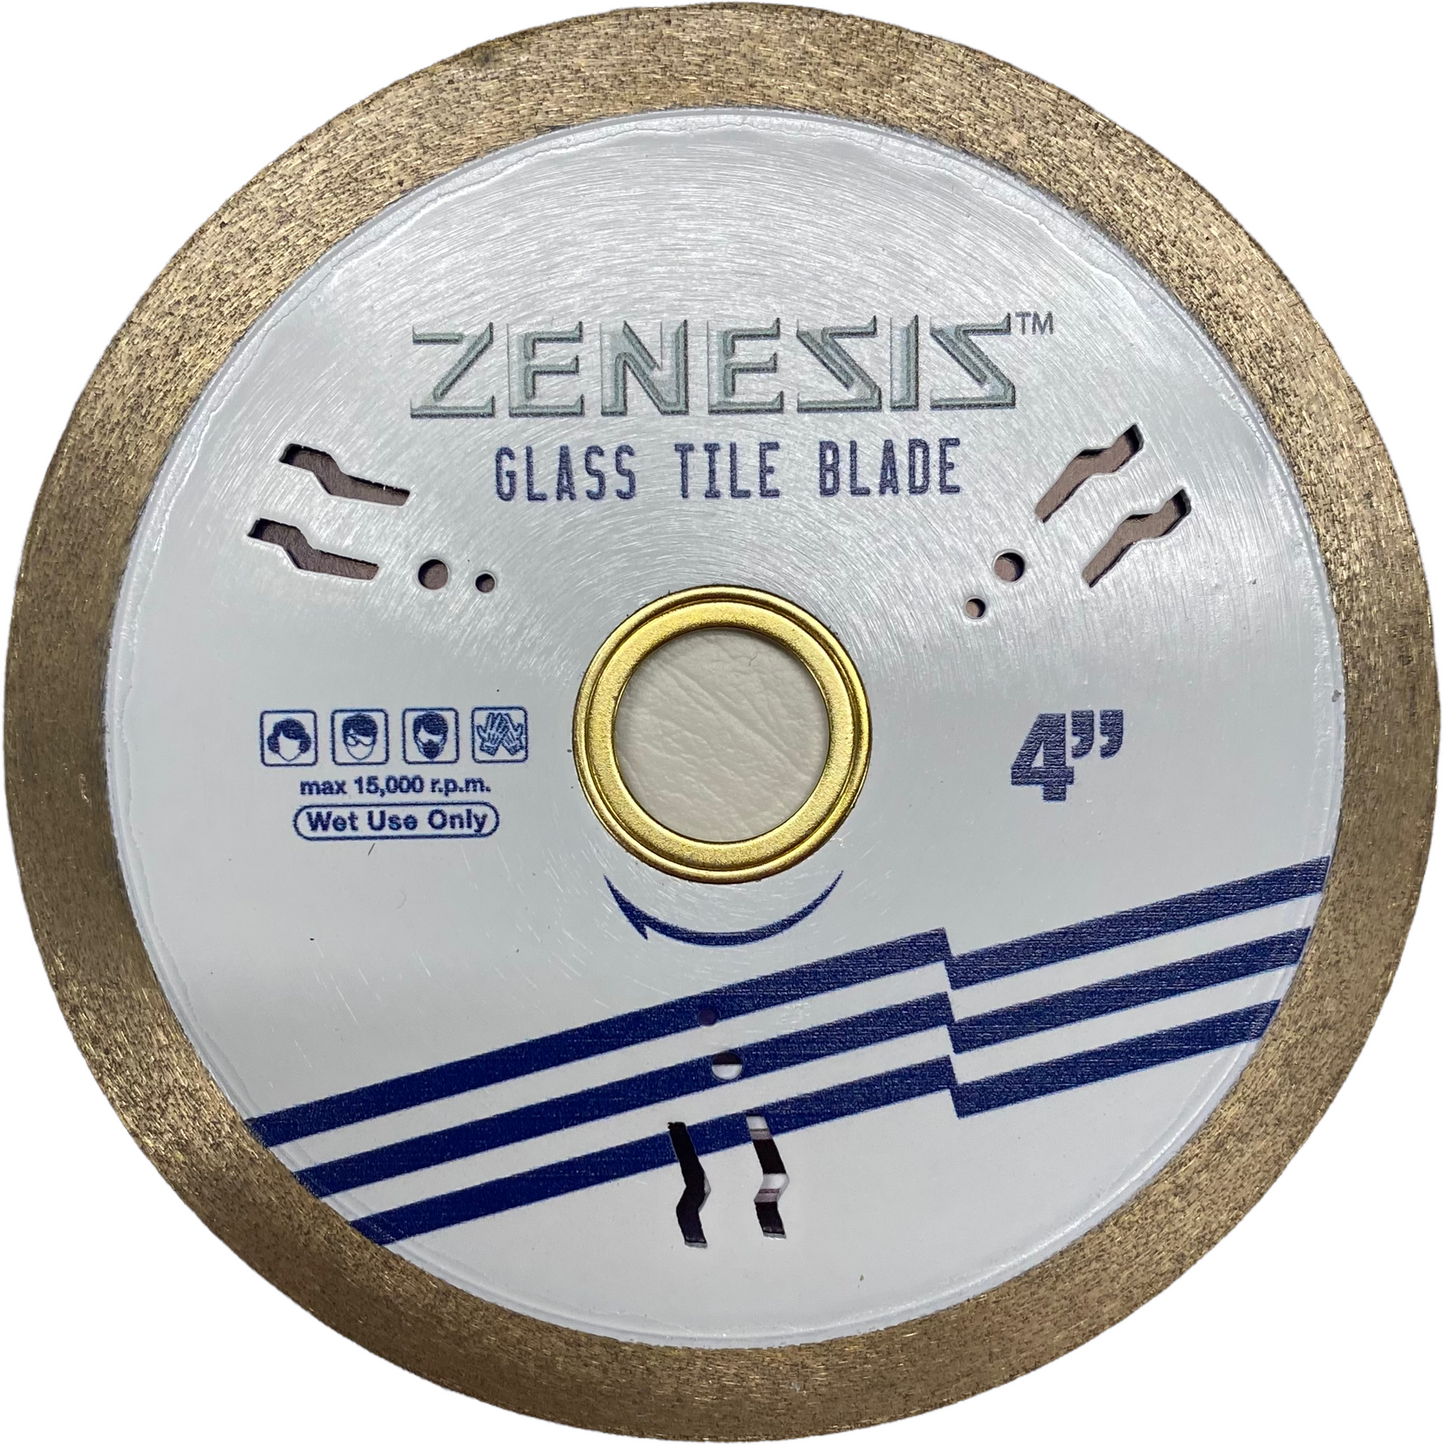 4.5” Zenesis Glass Tile Blade Fast Chip Free Cuts Continuous Rim